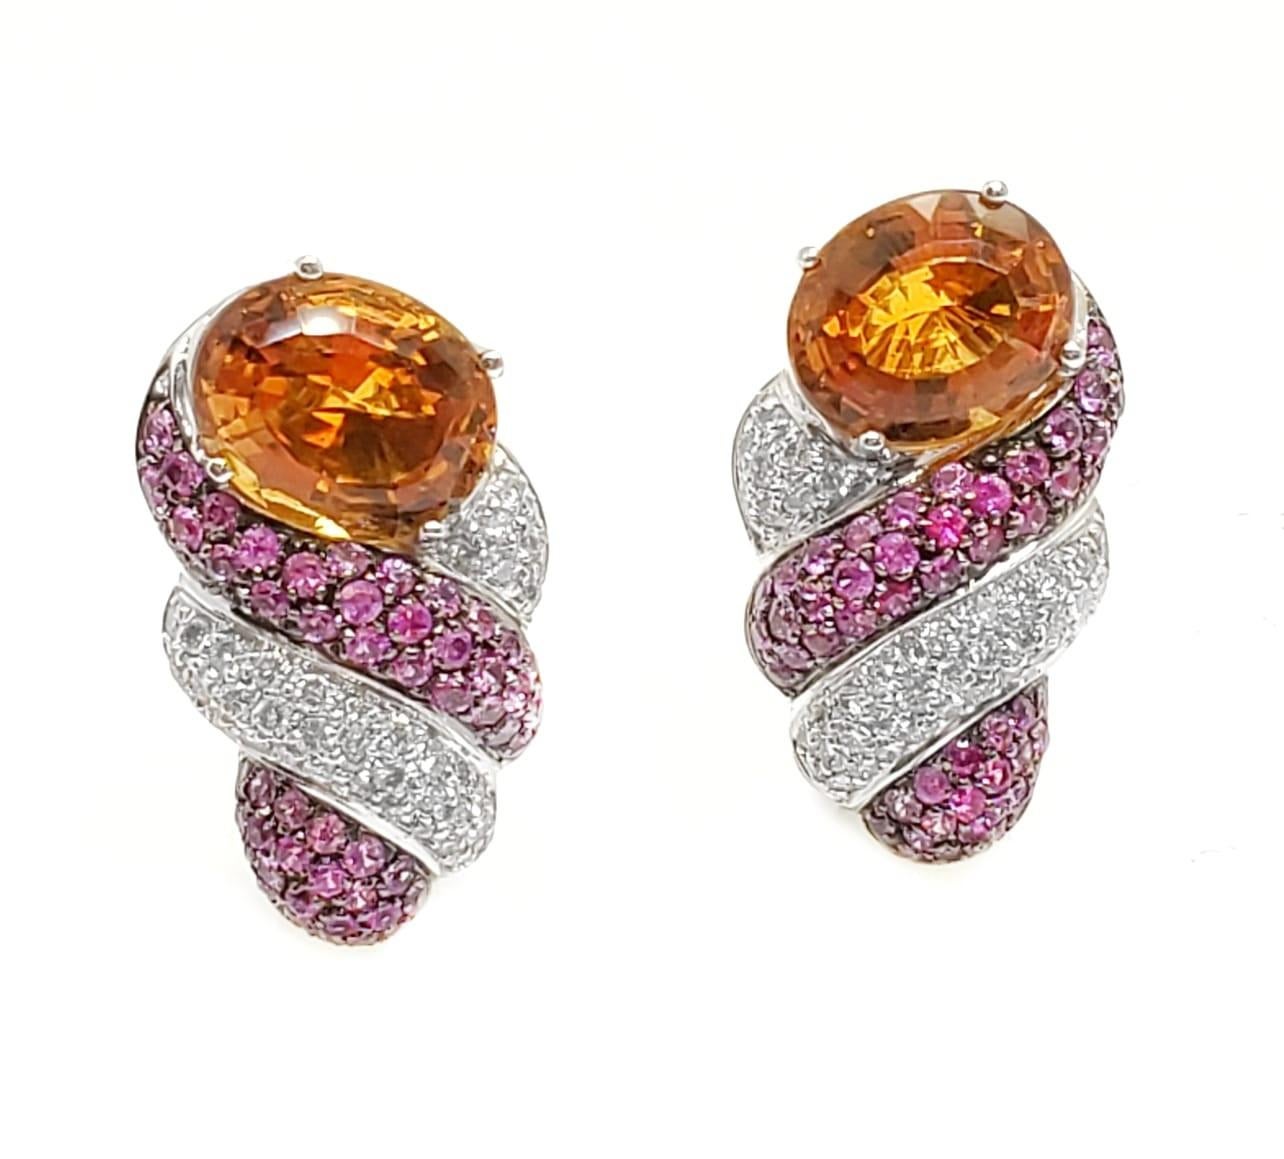 Contemporary Andreoli Citrine Pink Sapphire Diamond 18 Karat White Gold Earrings For Sale